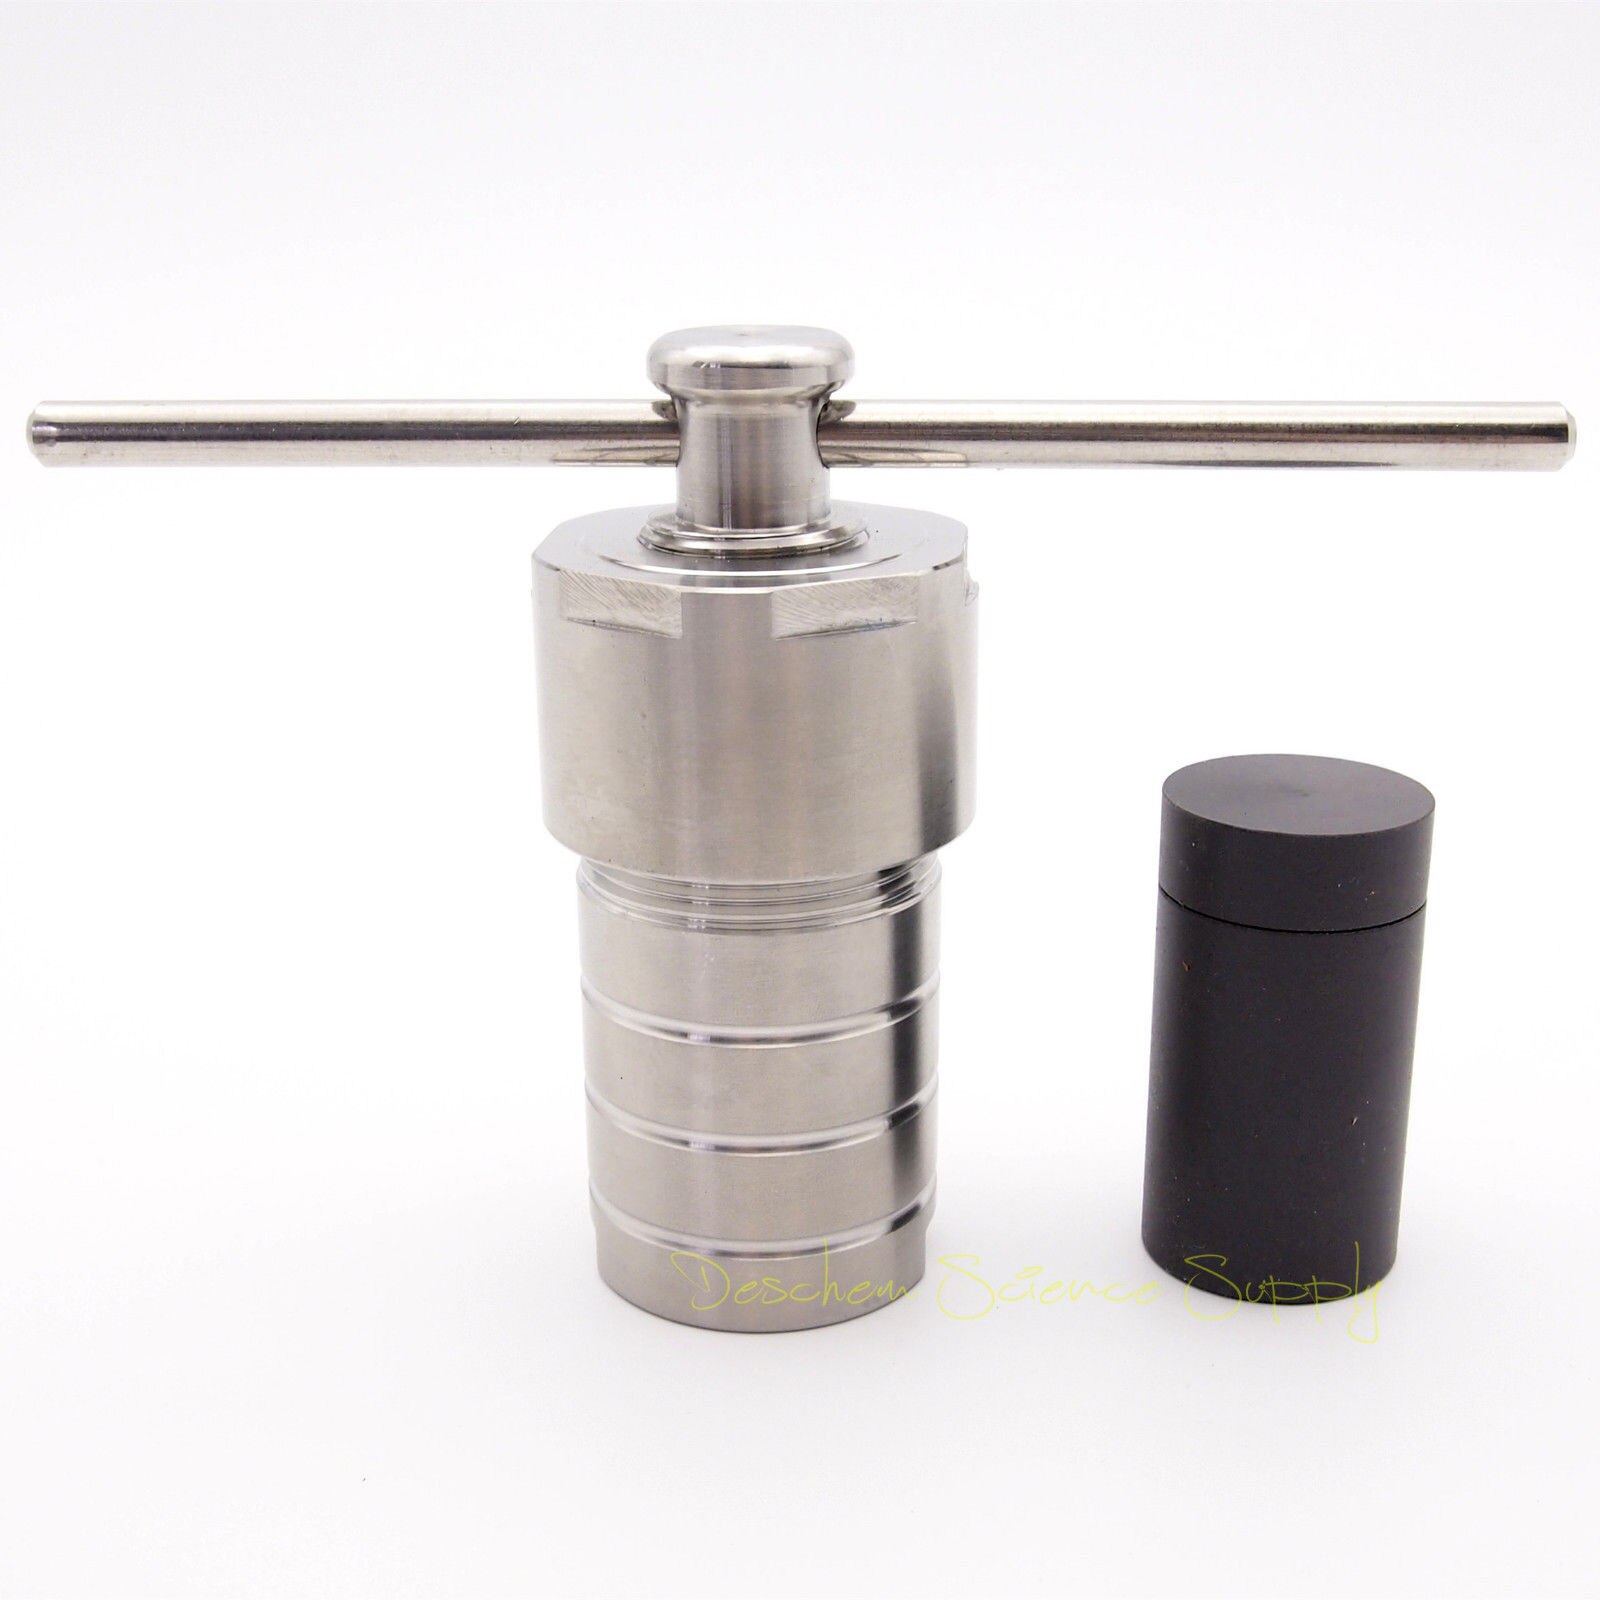 50ml PPL Lined Hydrothermal Synthesis Reactor Stainless Steel Tank